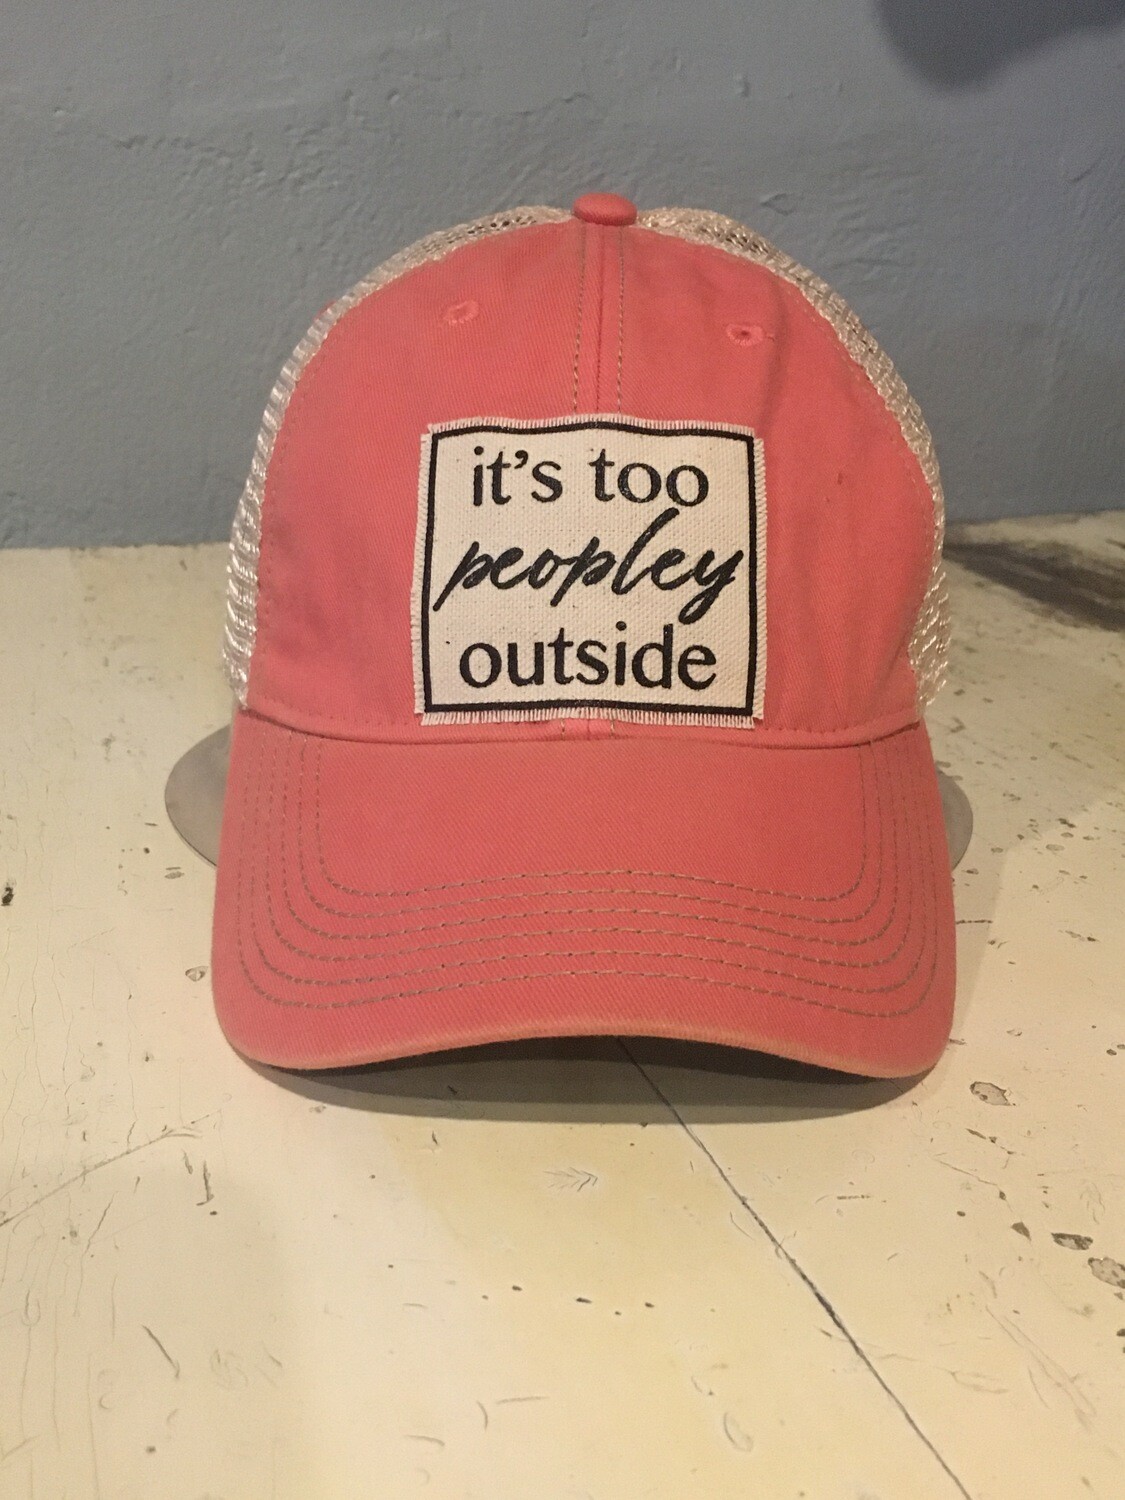 "It's to peopley outside" distressed cap